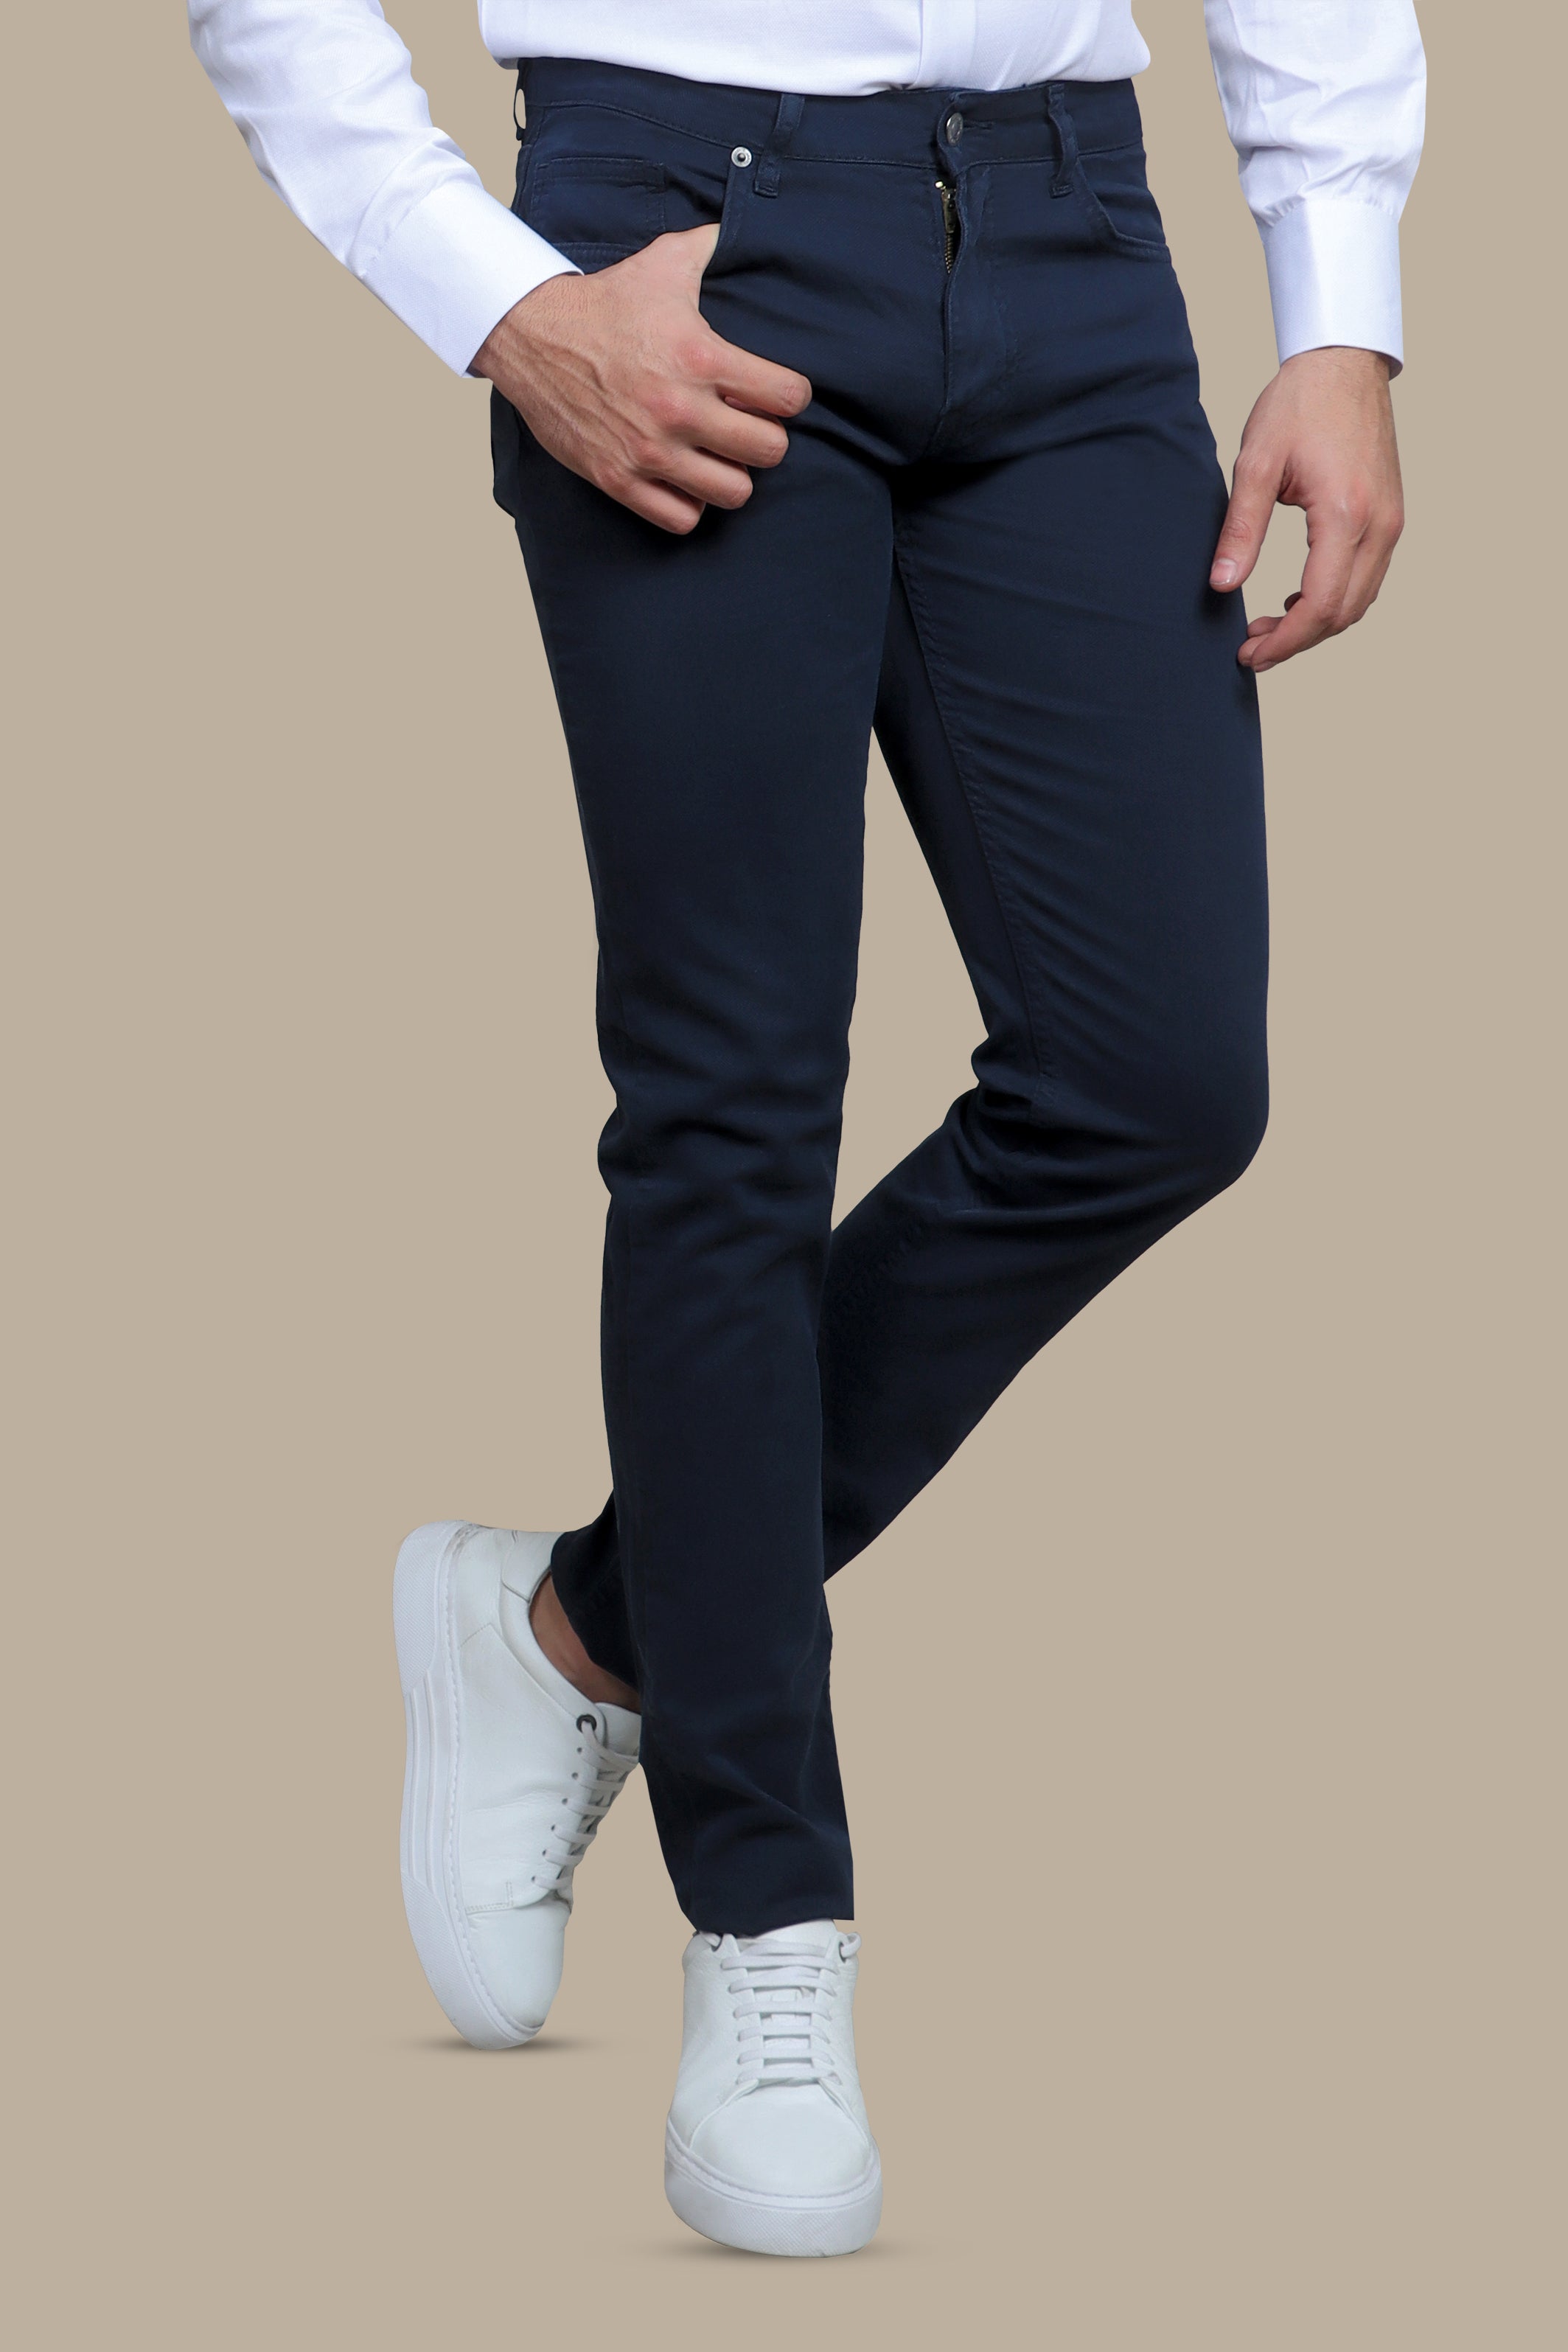 Classic Elegance: 5-Pocket Oxford Pants in Navy Hues